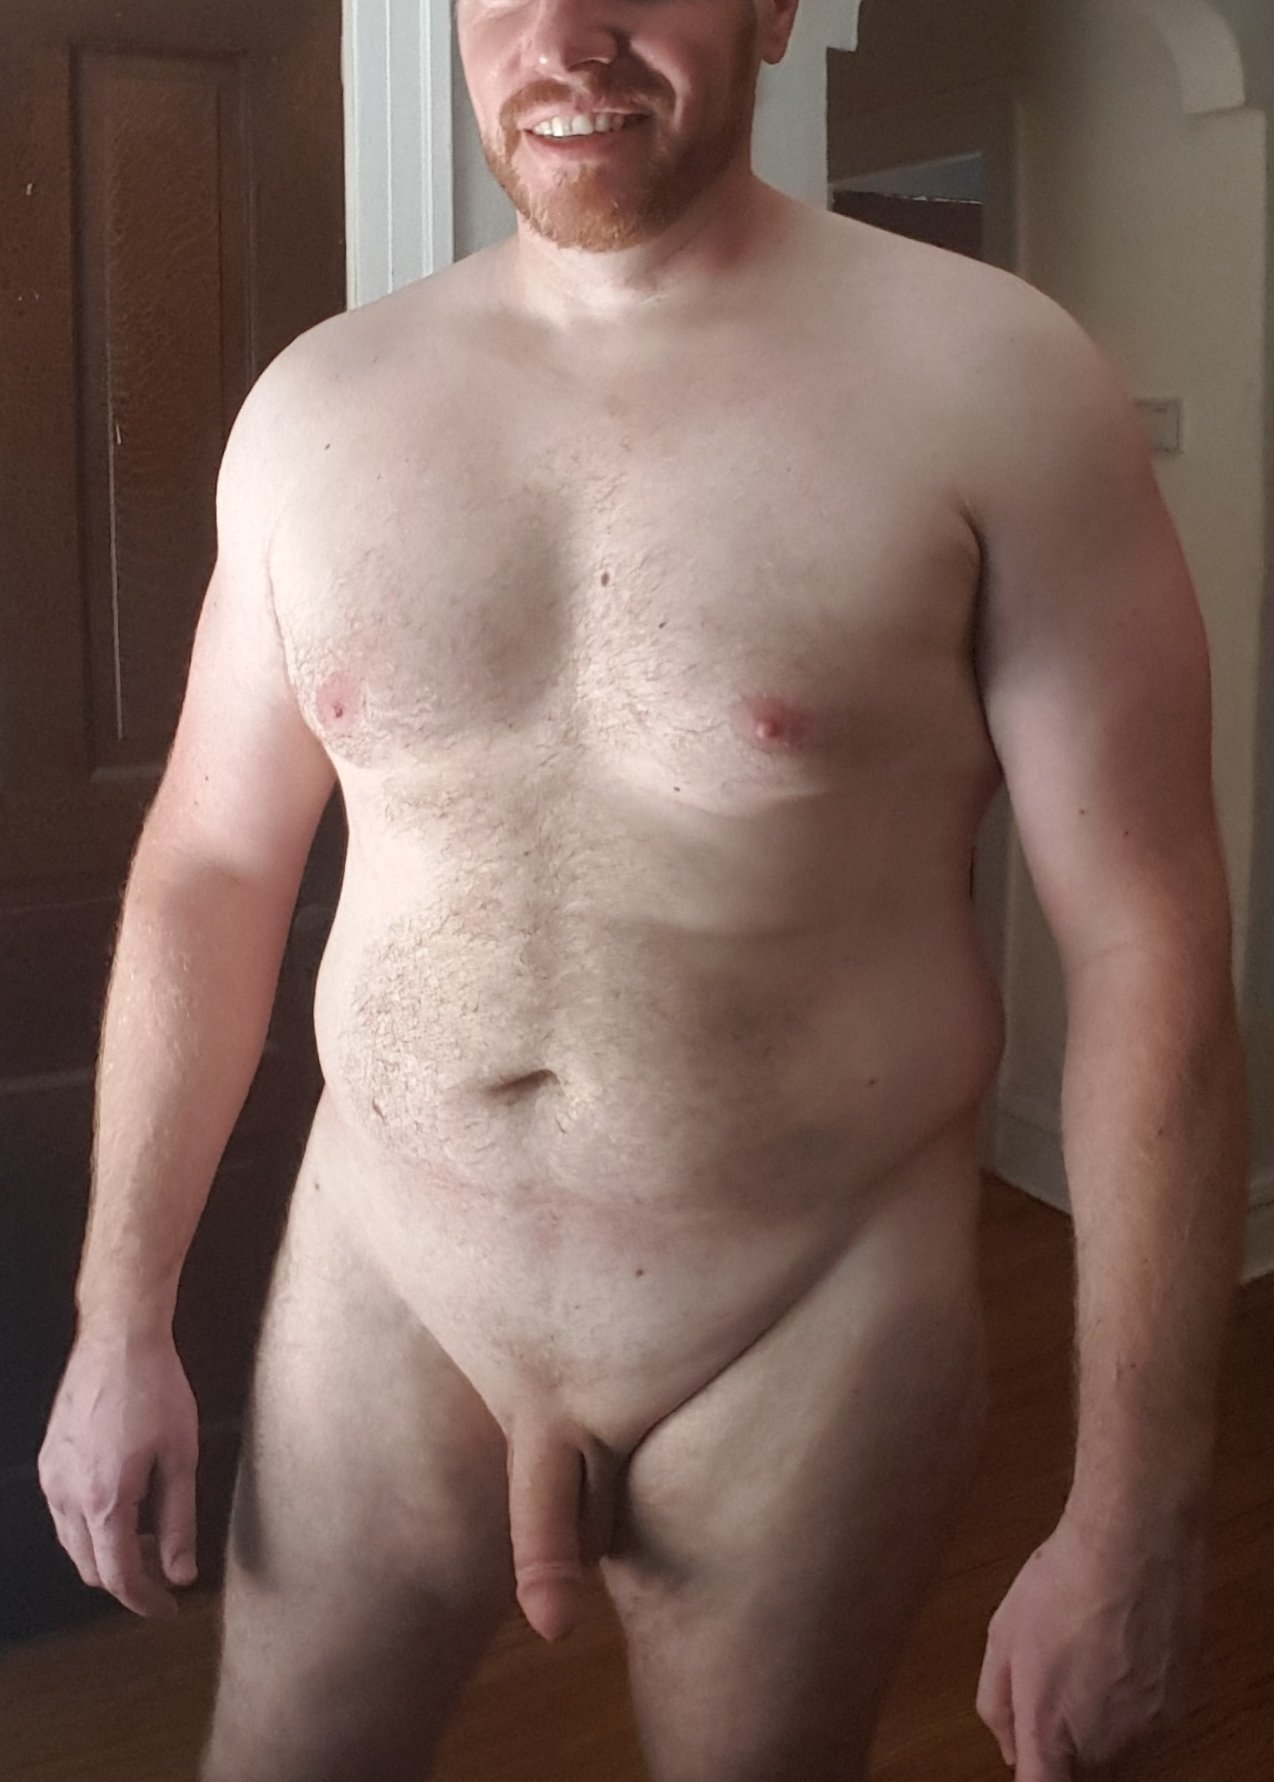 Hope this almost 40-year-old body is worthy to post here